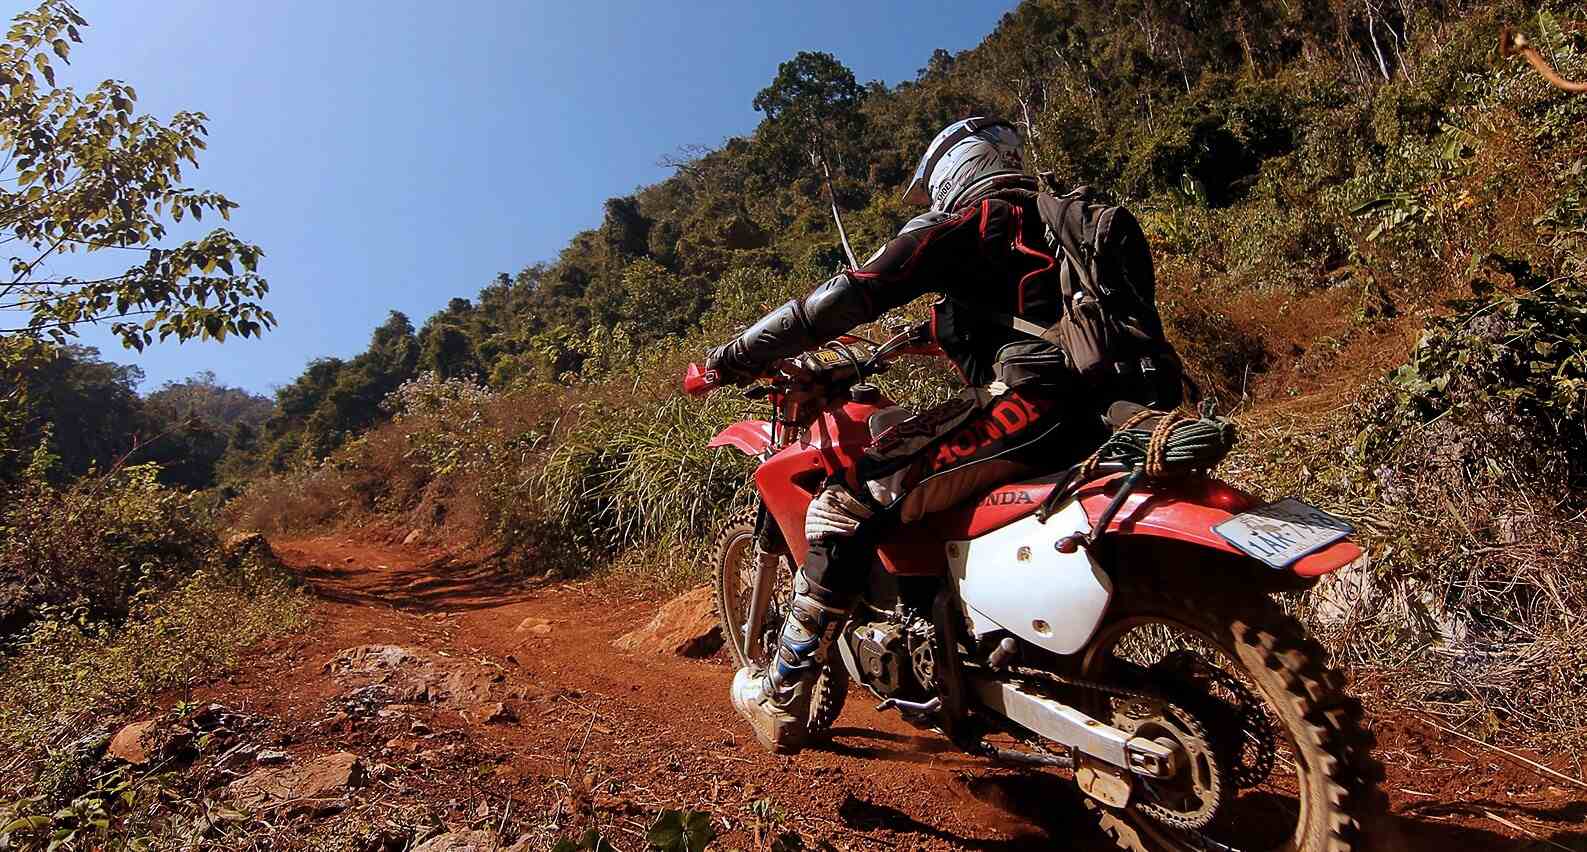 LAOS CENTRAL OFFROAD MOTORCYCLE TOUR